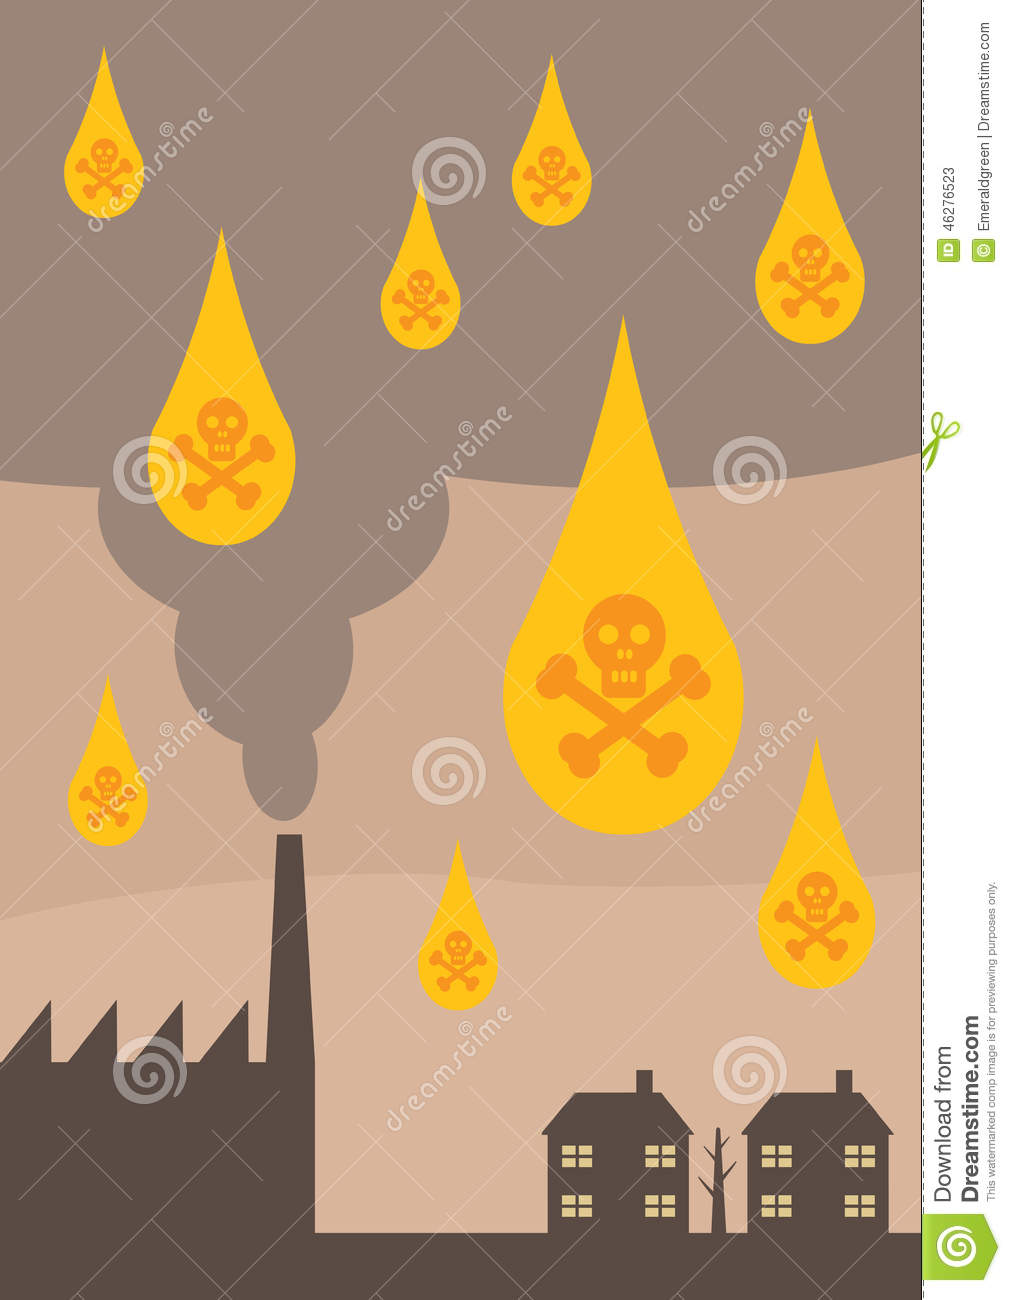 Of Toxic Air Pollution On The Environment In The Form Of Acid Rain